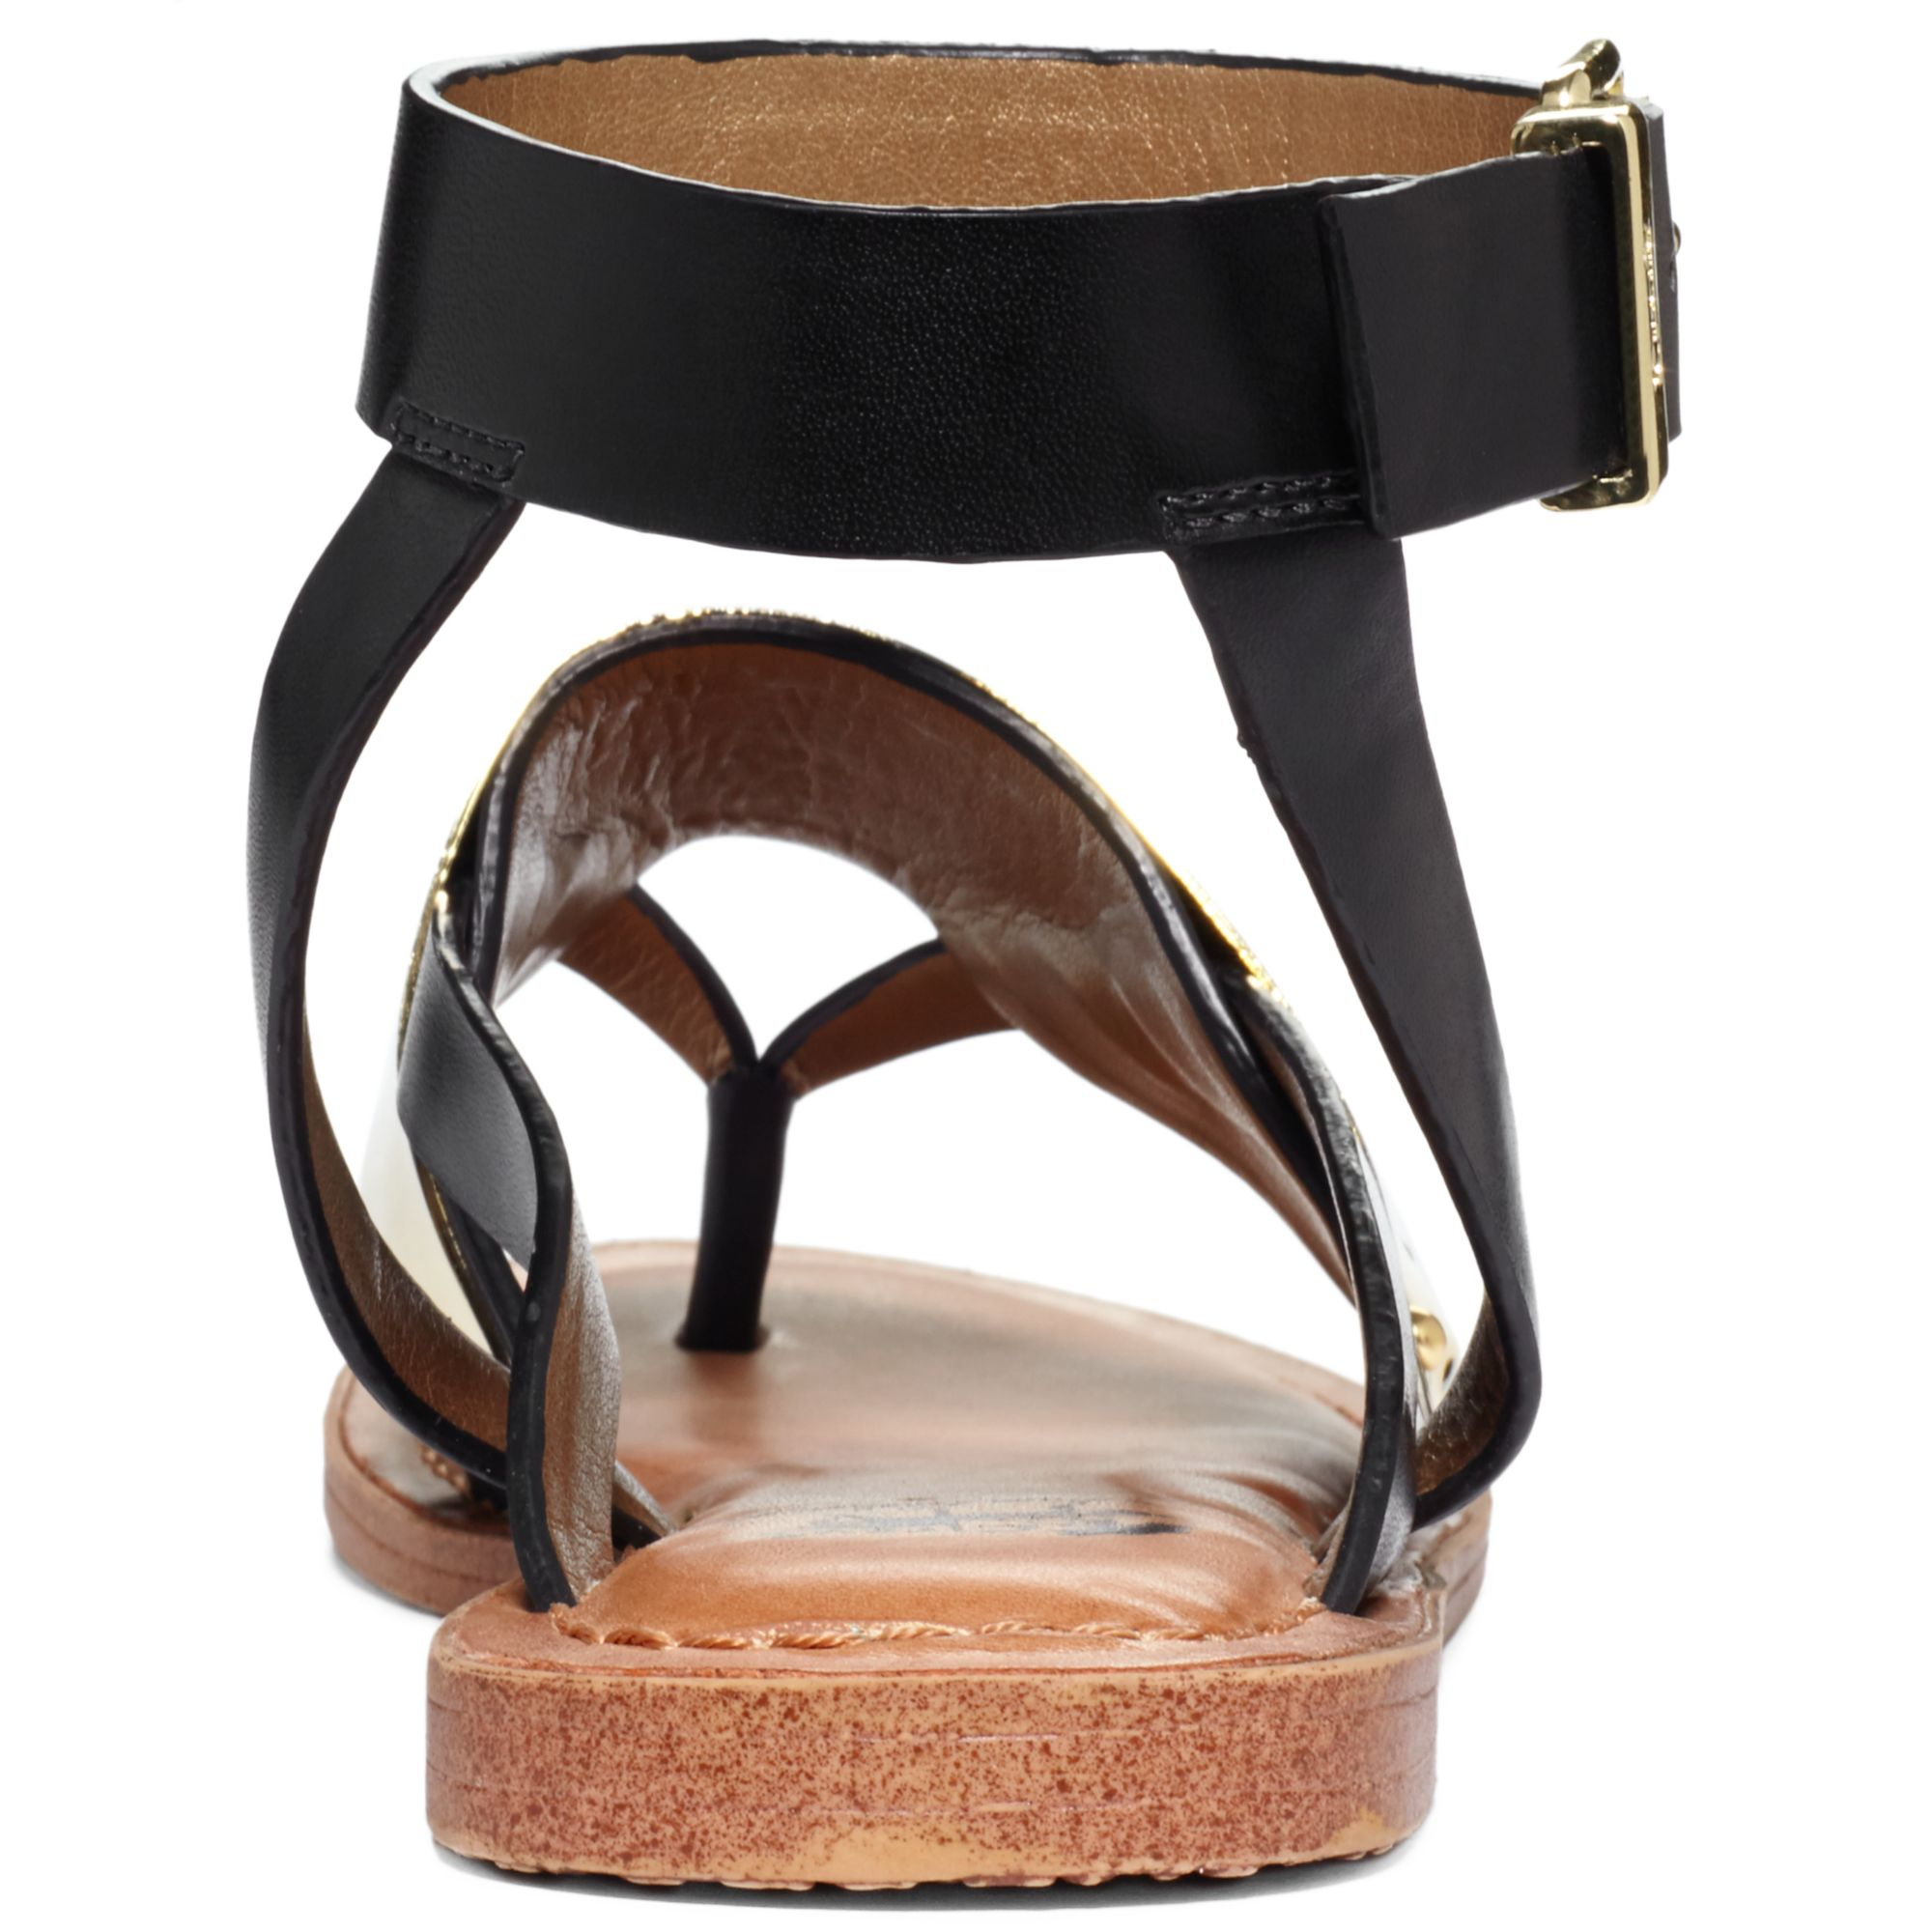 Lyst - Circus By Sam Edelman Mercer Ankle Strap Thong Sandals in Black